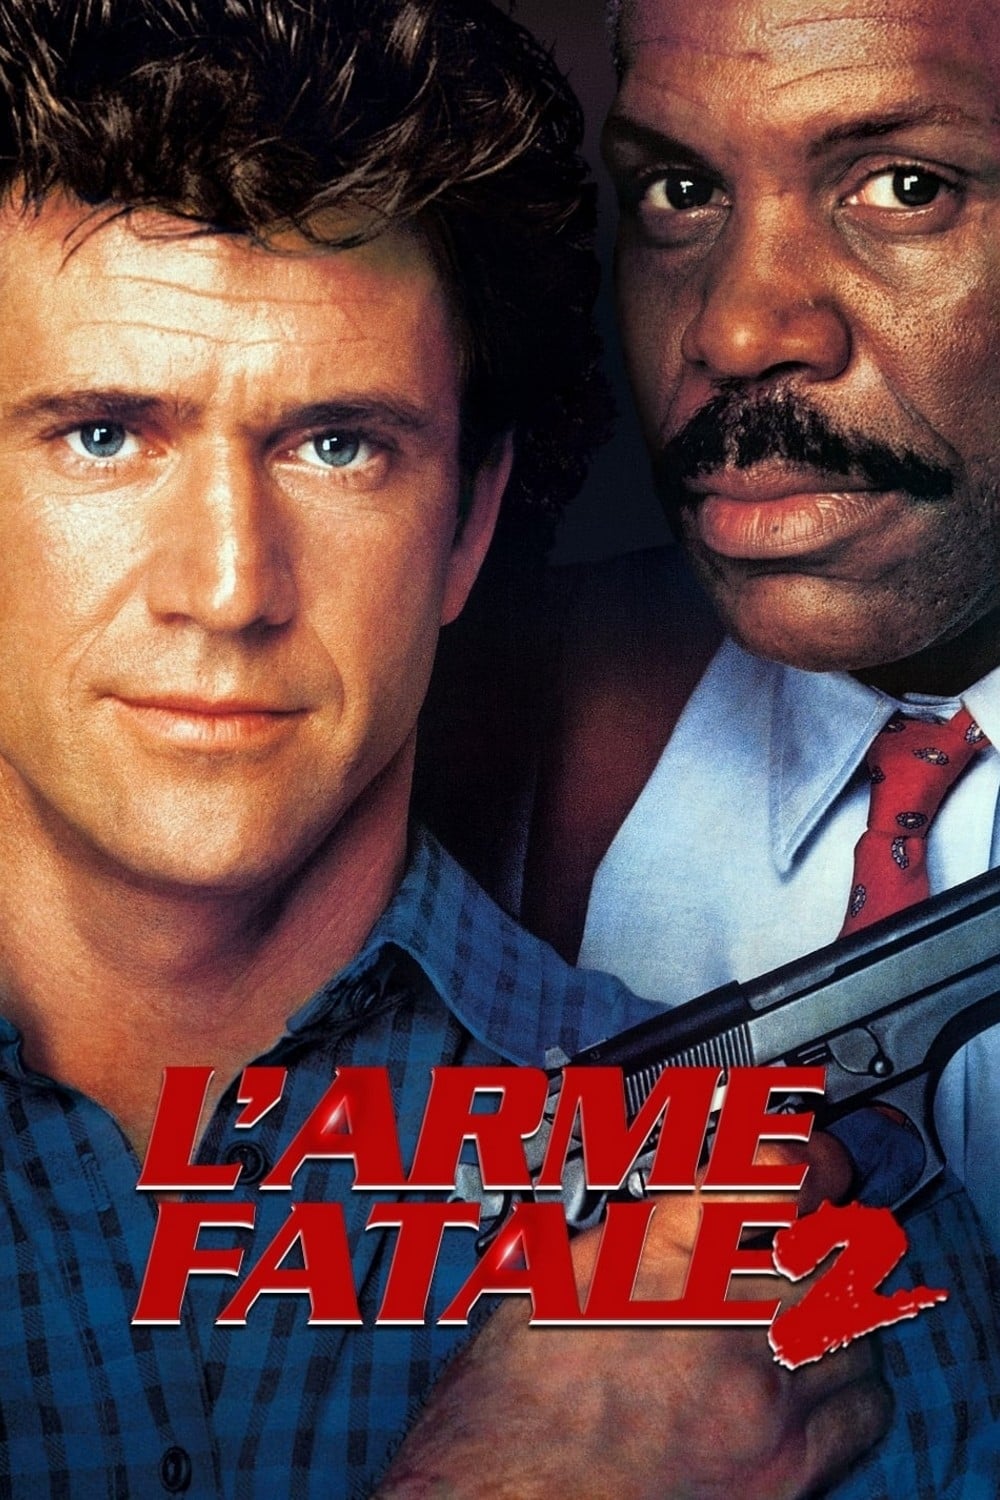 L'Arme fatale 2 Film Streaming